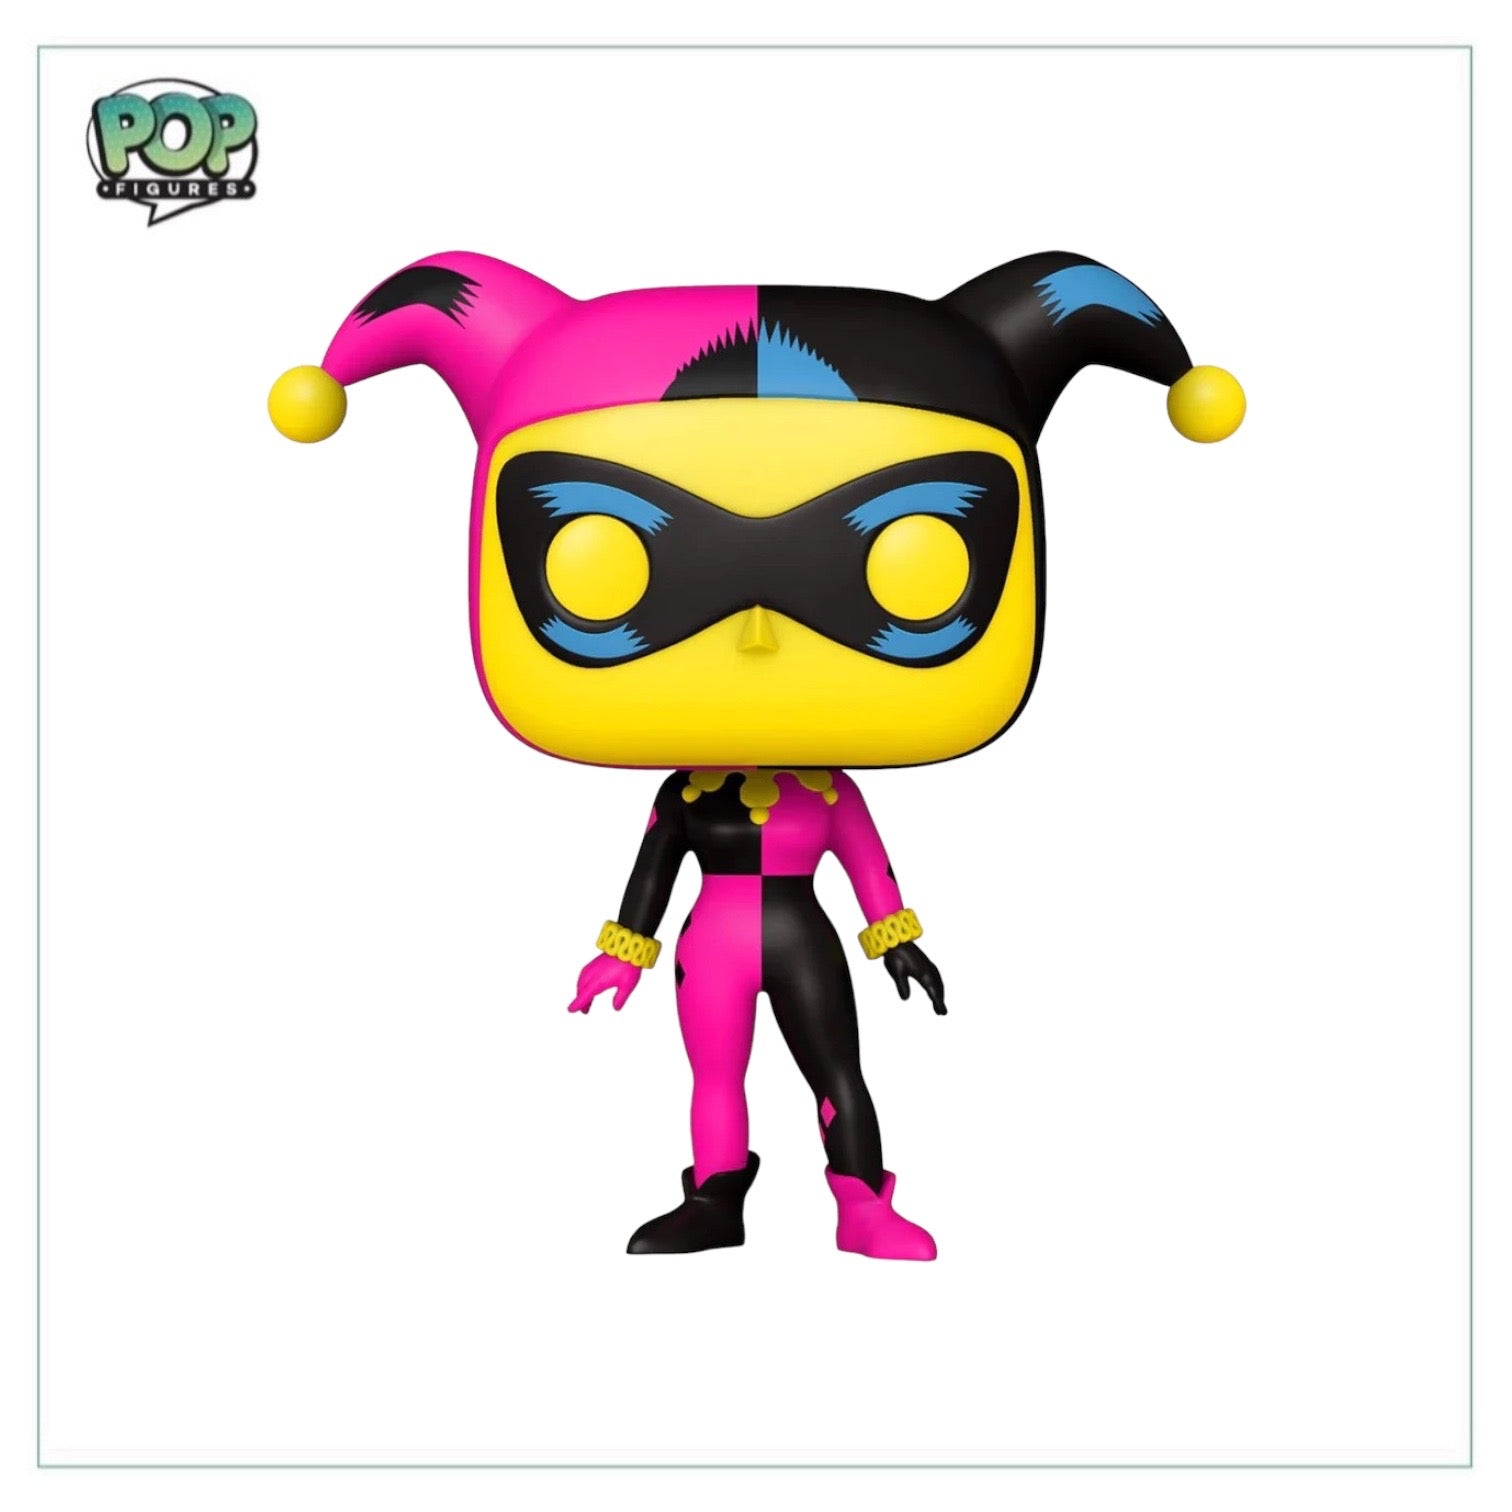 Harley Quinn #45 (Silver) Funko Pop! - DC Super Heroes - Hot Topic  Employees Exclusive LE144 Pcs - Condition 8.5/10